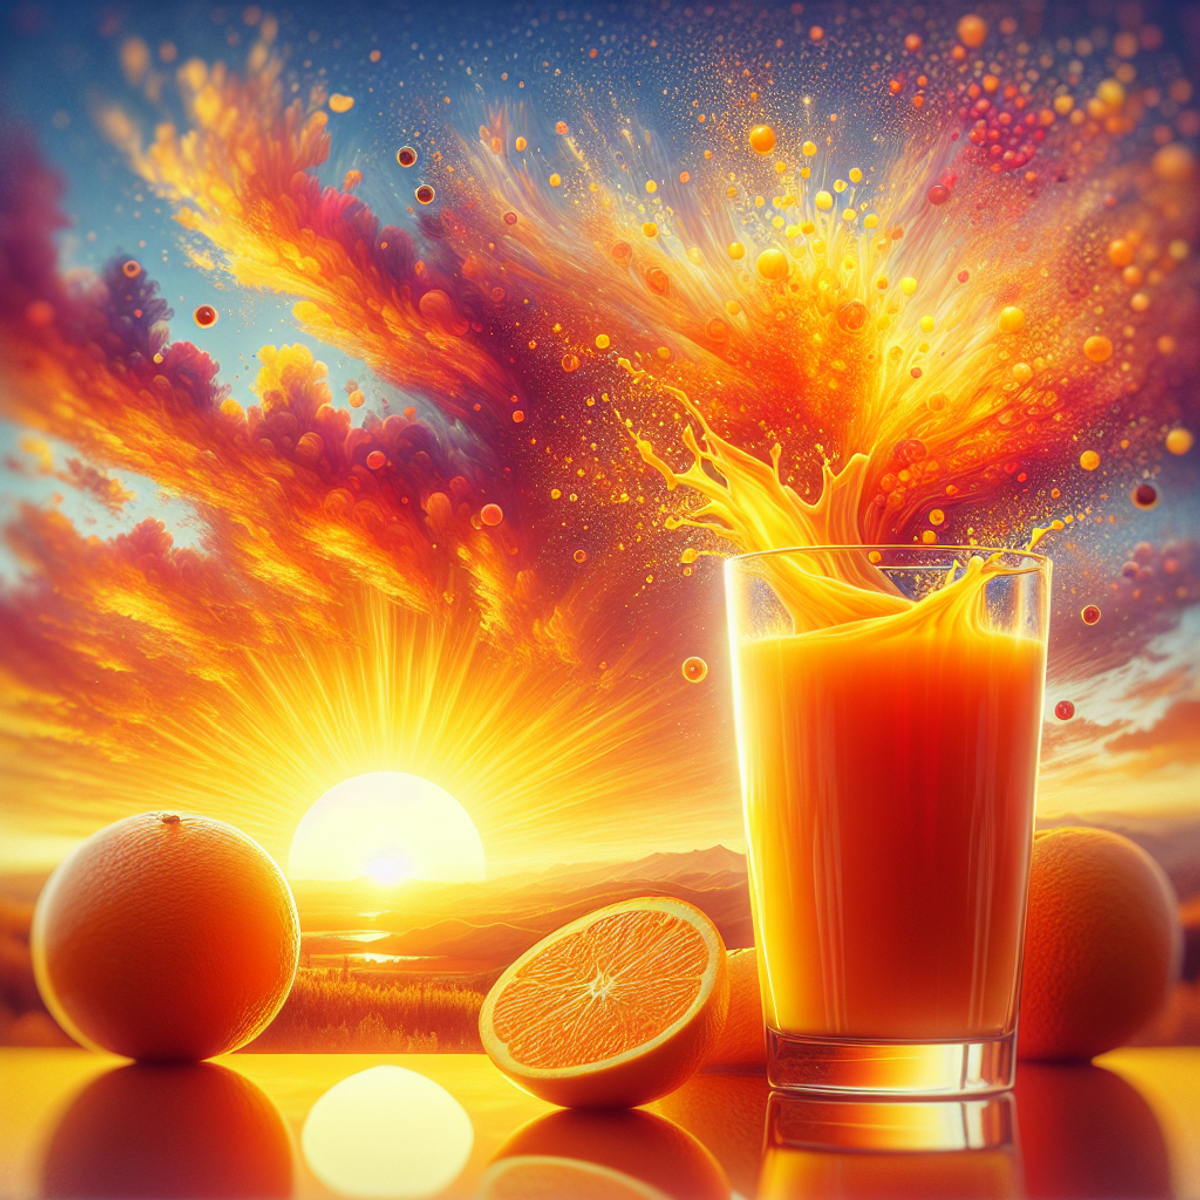 A glass of orange juice in front of a stunning sunrise.